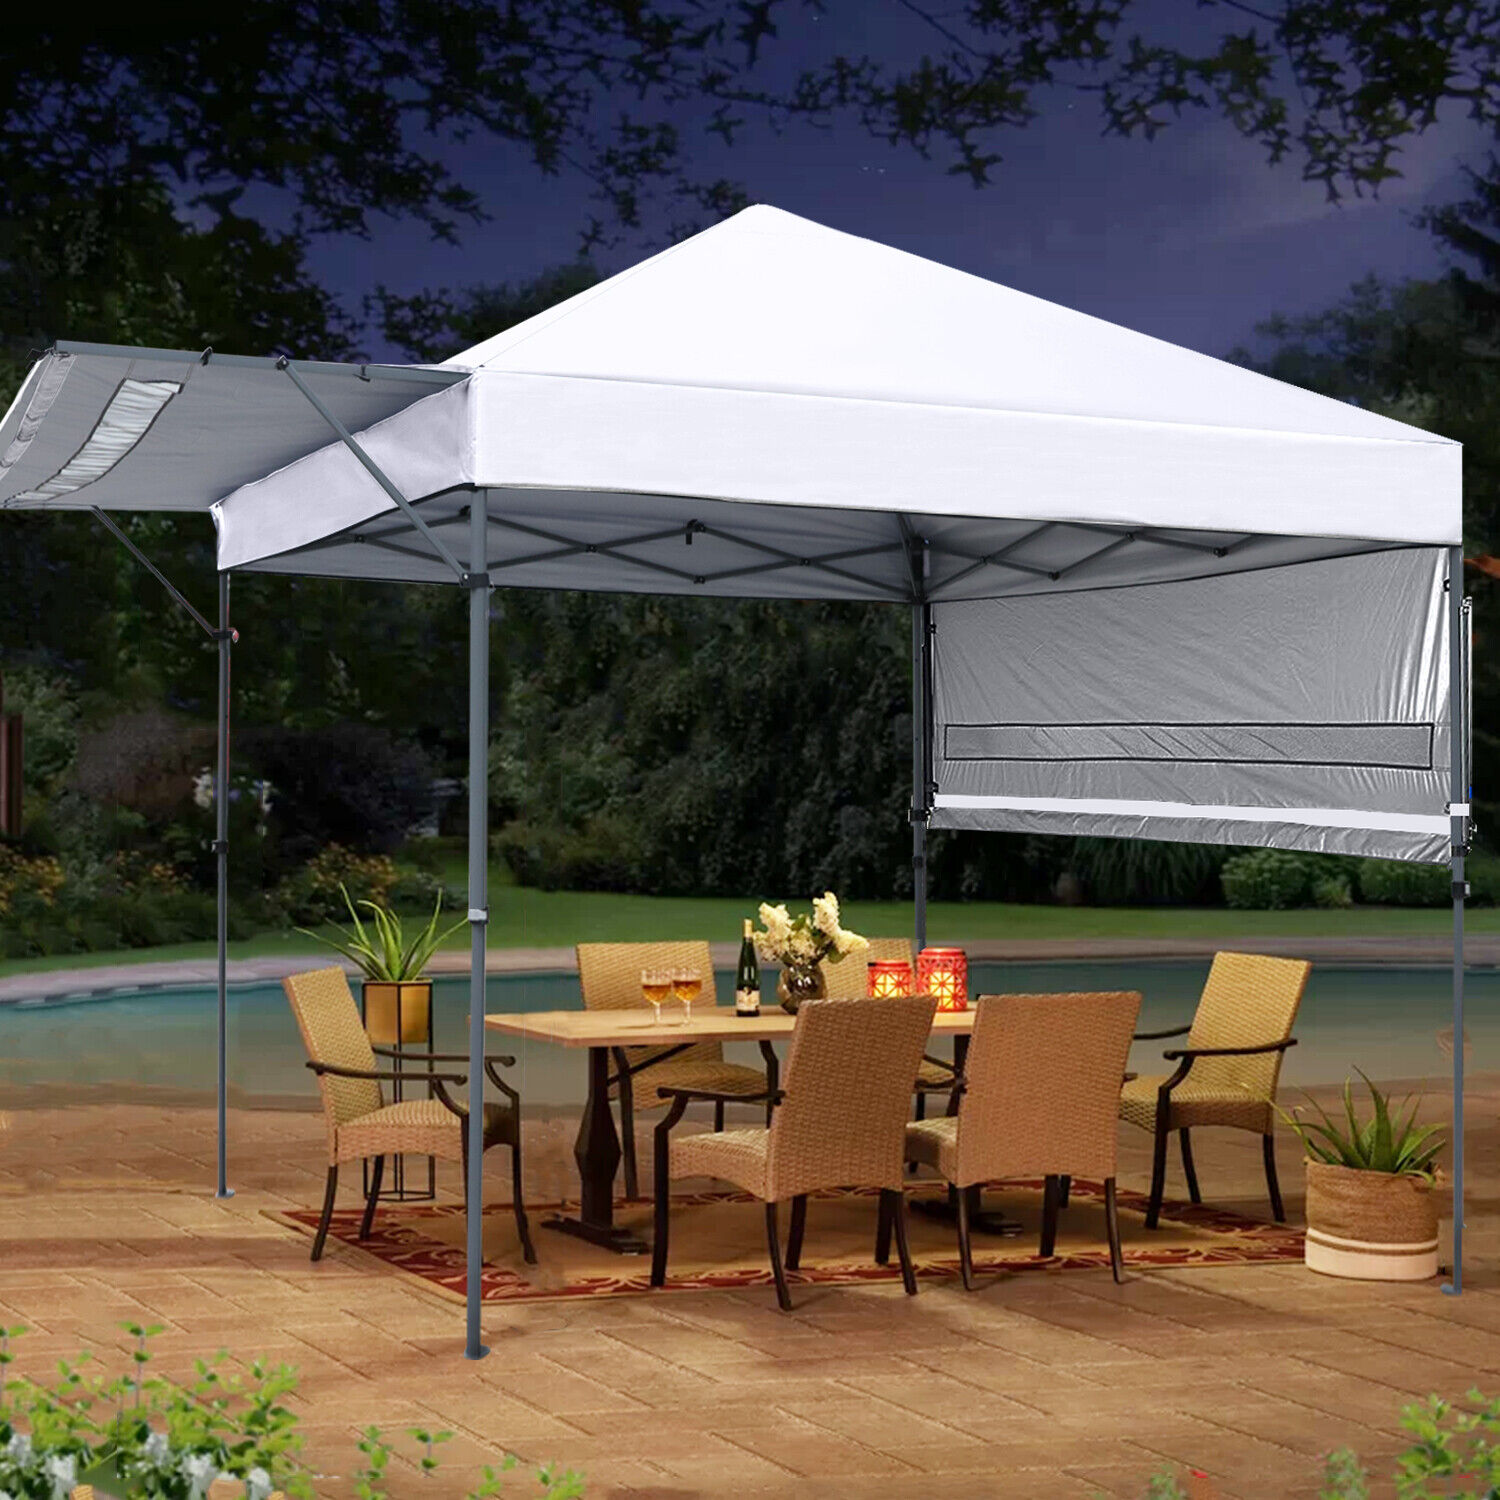 MASTERCANOPY 10' x 10' Pop-up Gazebo Canopy Tent with Double Awnings, White